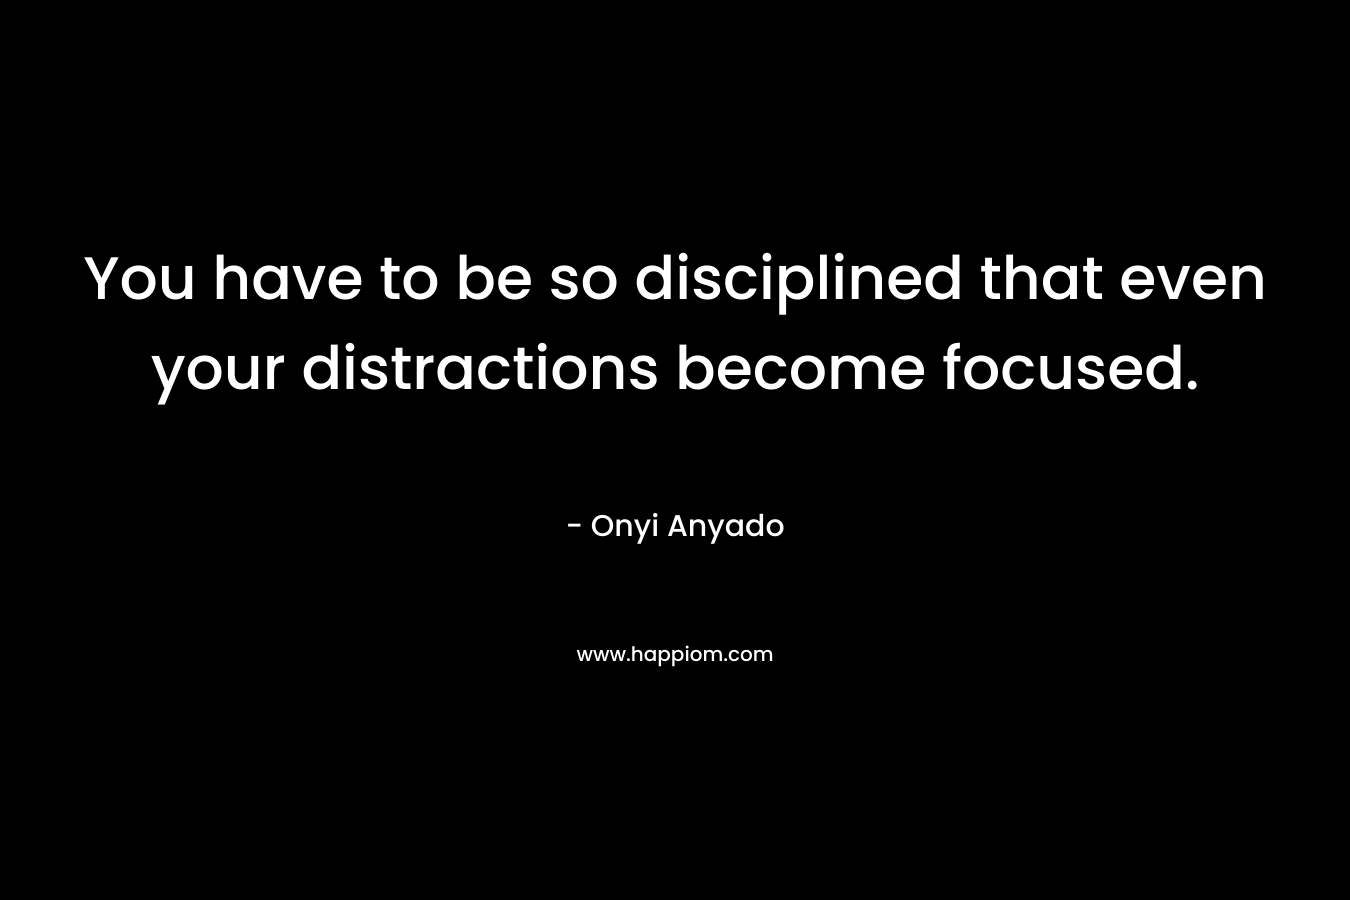 You have to be so disciplined that even your distractions become focused. – Onyi Anyado